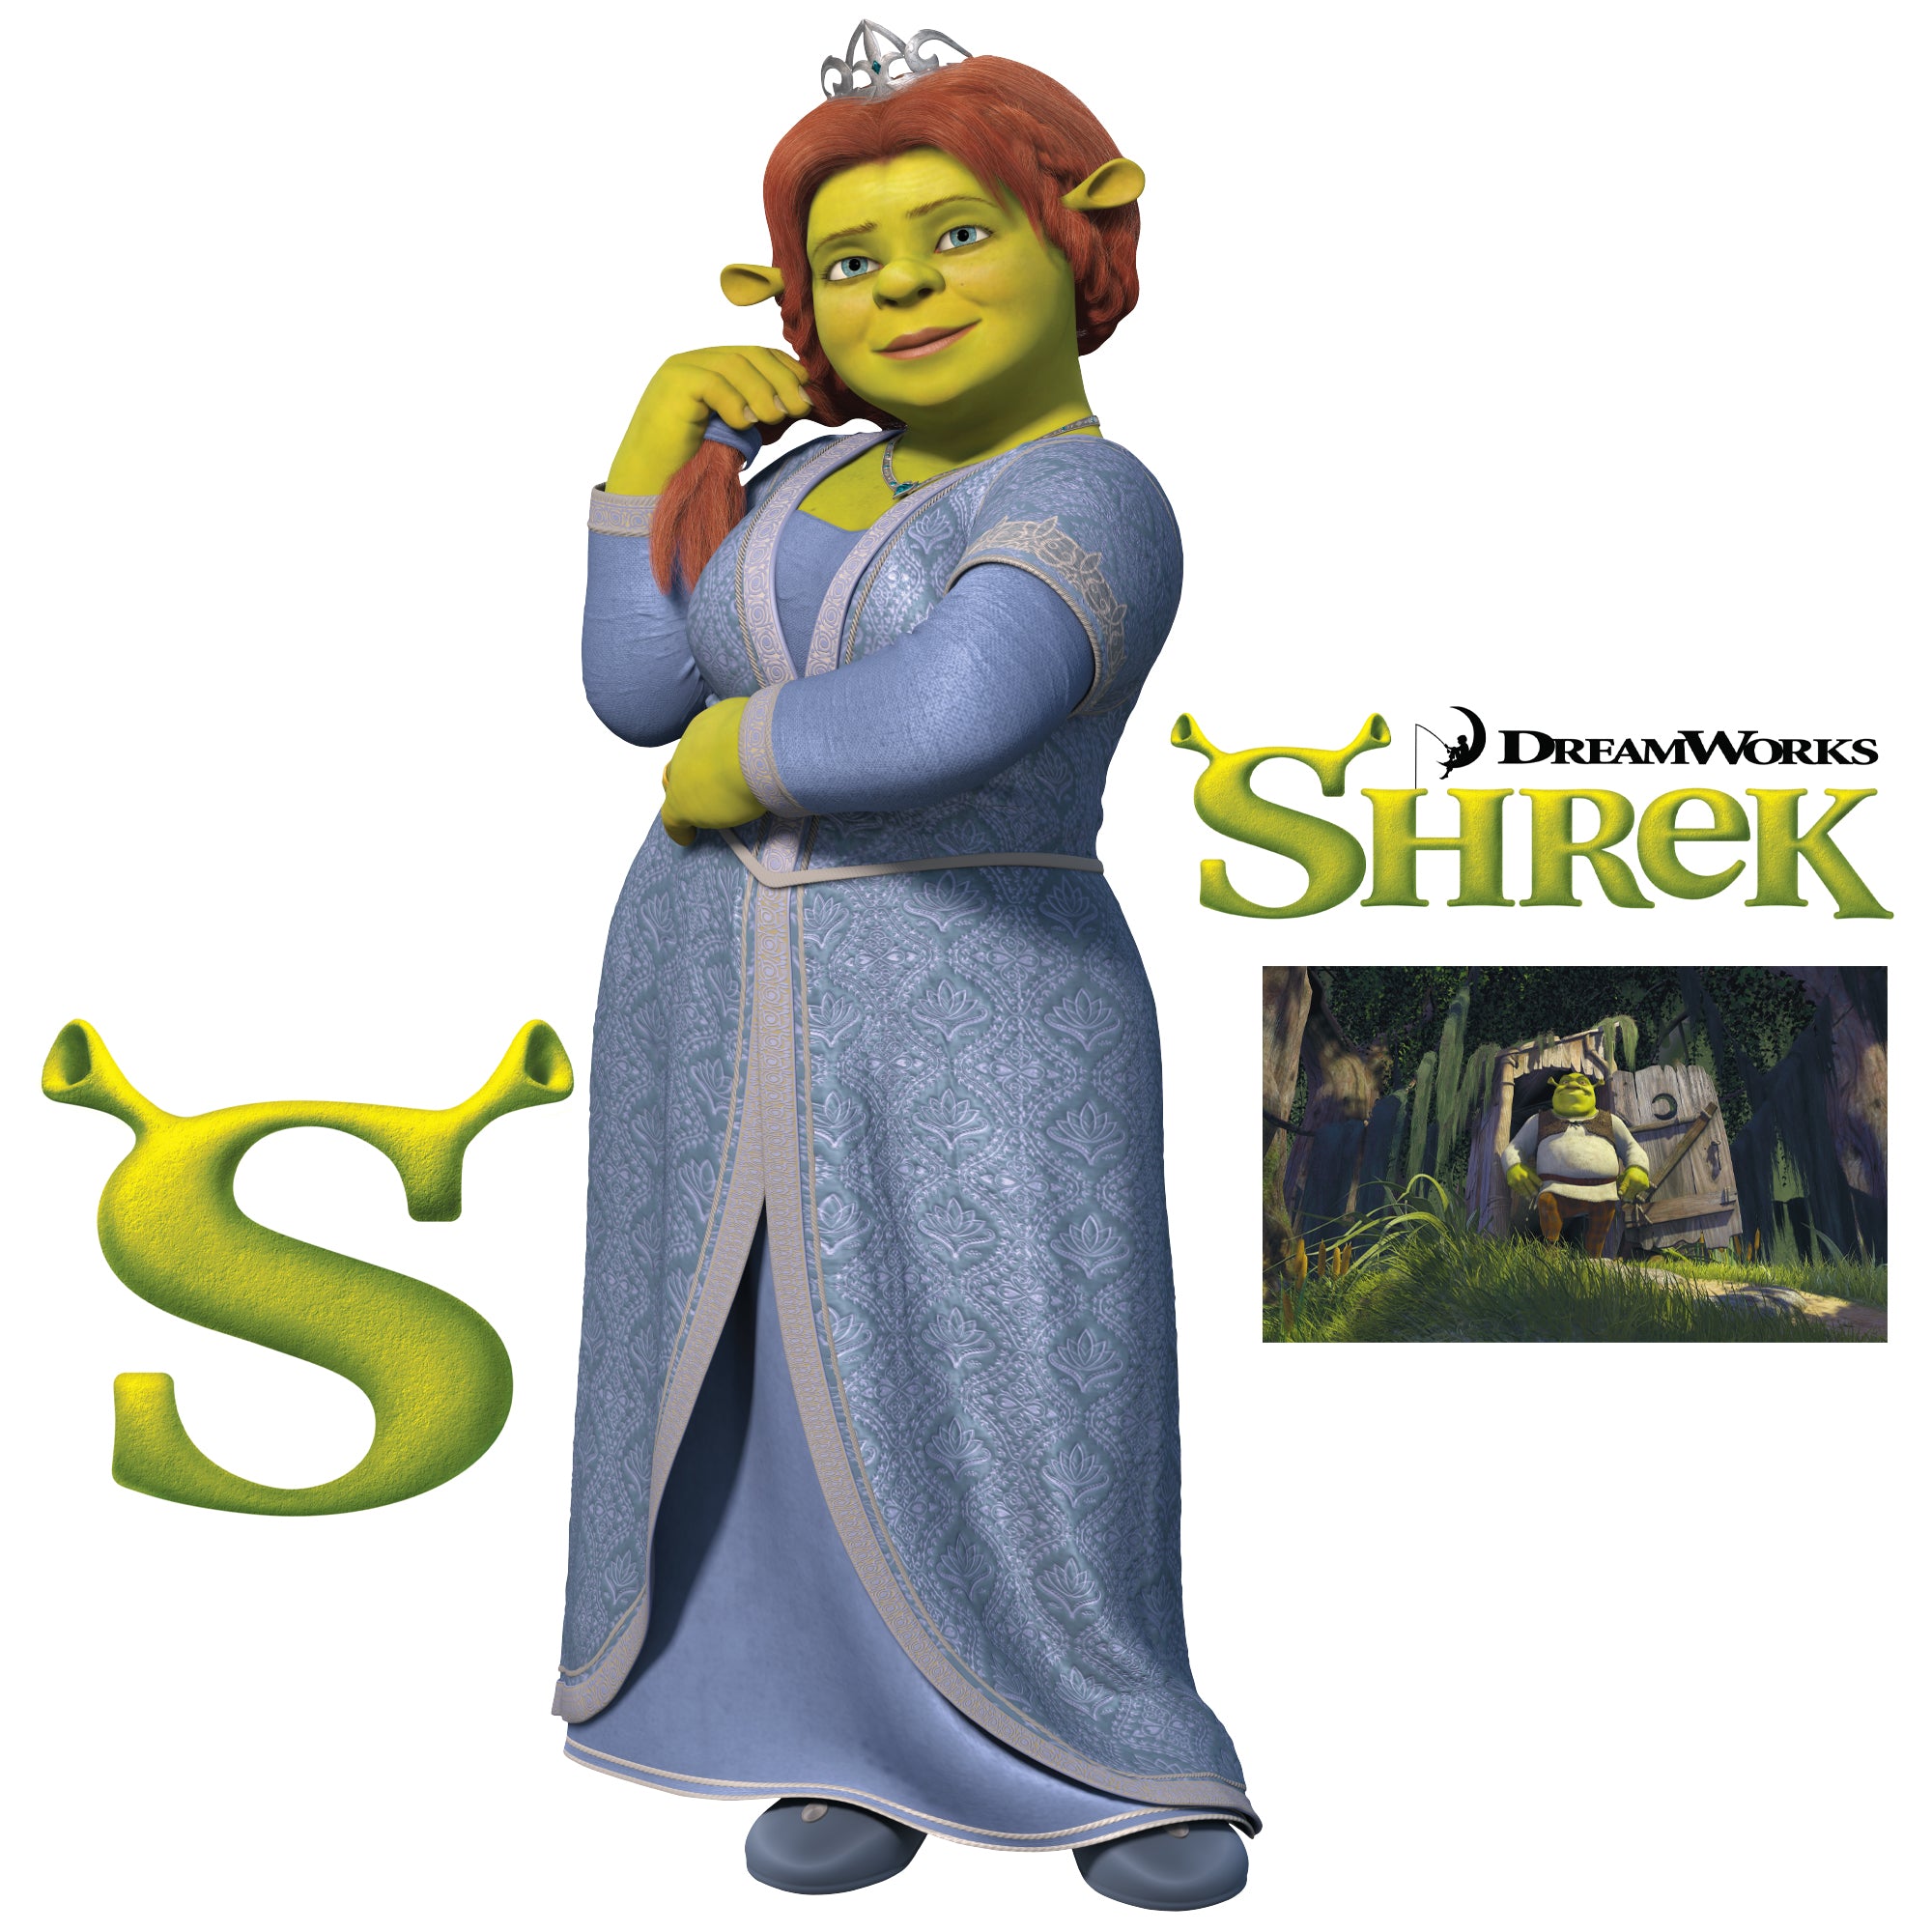 annie erickson recommends pictures of fiona from shrek pic